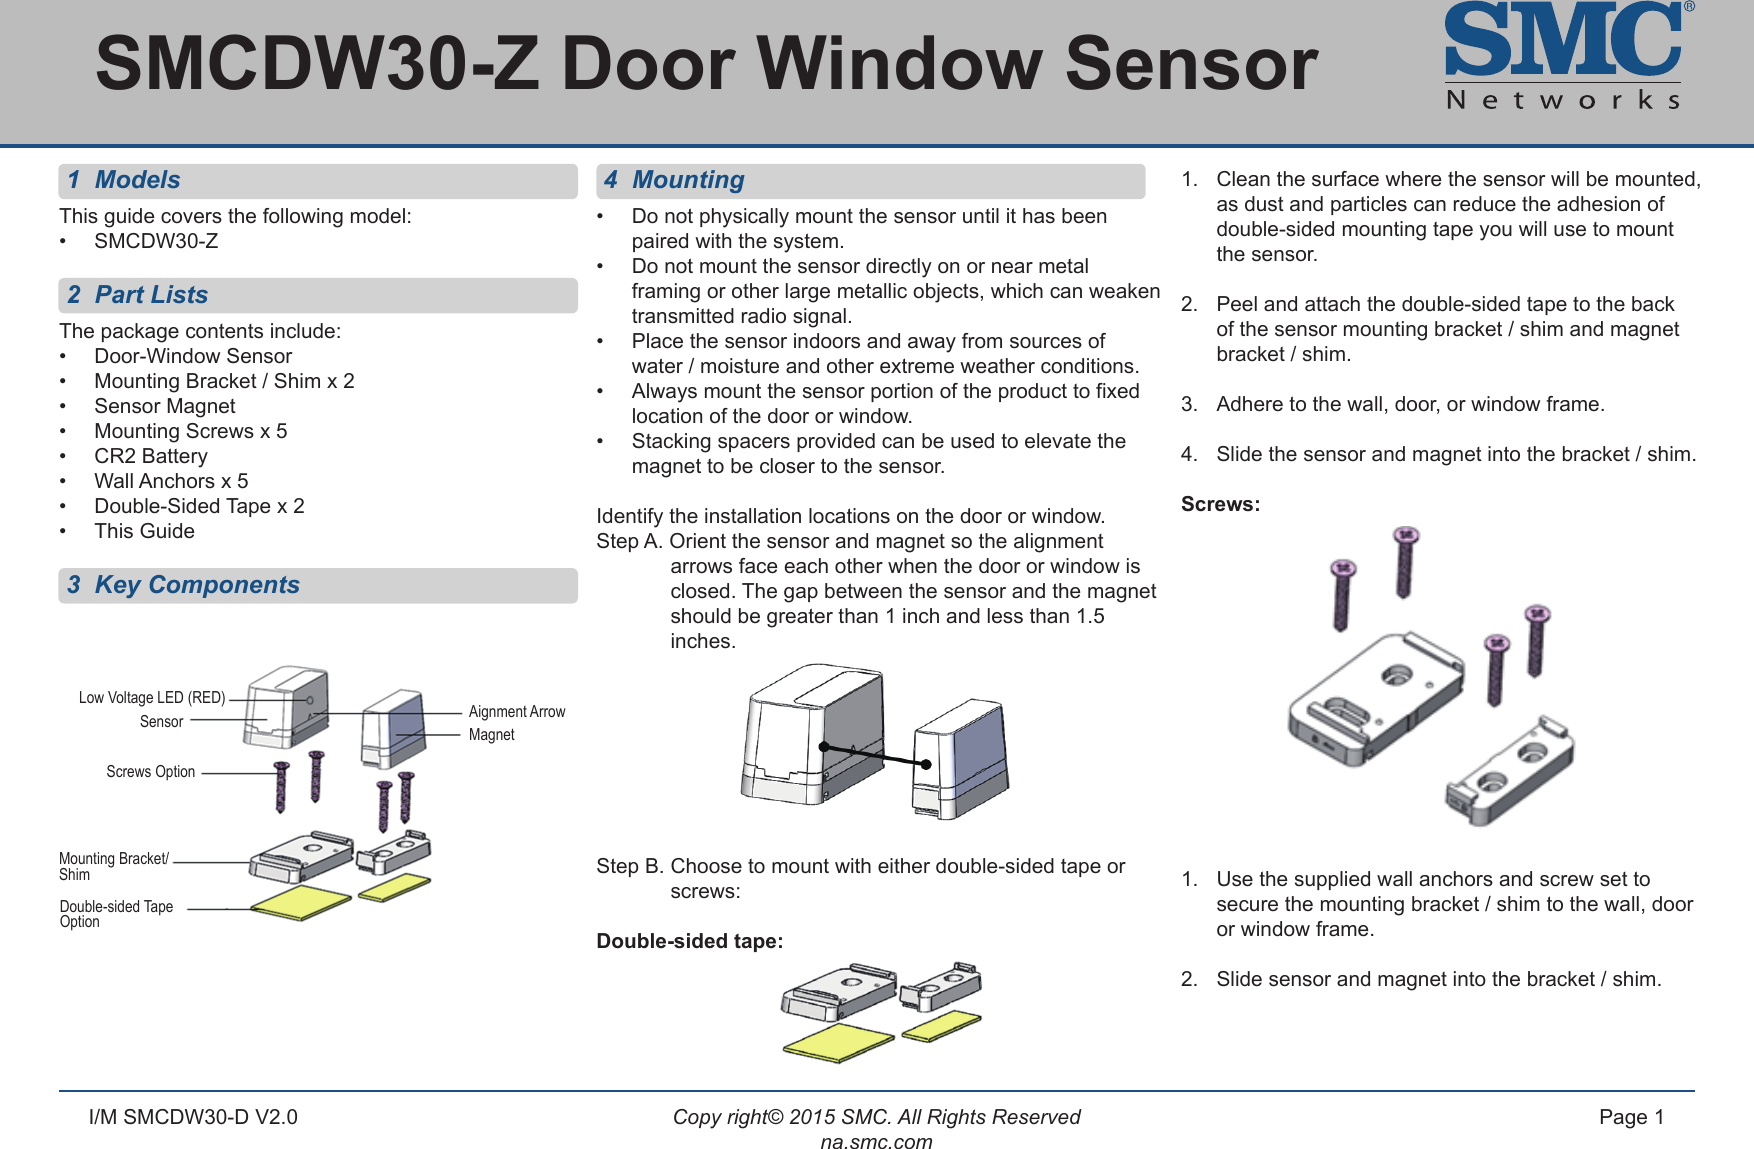 Copy right© 2015 SMC. All Rights Reservedna.smc.comPage 1I/M SMCDW30-D V2.0 1  ModelsThis guide covers the following model:•  SMCDW30-Z 2  Part ListsThe package contents include:•  Door-Window Sensor •  Mounting Bracket / Shim x 2•  Sensor Magnet •  Mounting Screws x 5•  CR2 Battery•  Wall Anchors x 5•  Double-Sided Tape x 2 •  This Guide 3  Key Components 4 Mounting•  Do not physically mount the sensor until it has been     paired with the system.•  Do not mount the sensor directly on or near metal      framing or other large metallic objects, which can weaken    transmitted radio signal.•  Place the sensor indoors and away from sources of      water / moisture and other extreme weather conditions.•  Always mount the sensor portion of the product to fixed    location of the door or window.•  Stacking spacers provided can be used to elevate the    magnet to be closer to the sensor.Identify the installation locations on the door or window. Step A. Orient the sensor and magnet so the alignment        arrows face each other when the door or window is      closed. The gap between the sensor and the magnet      should be greater than 1 inch and less than 1.5       inches.  Step B. Choose to mount with either double-sided tape or     screws:Double-sided tape: 1.   Clean the surface where the sensor will be mounted,    as dust and particles can reduce the adhesion of      double-sided mounting tape you will use to mount   the sensor.2.  Peel and attach the double-sided tape to the back   of the sensor mounting bracket / shim and magnet      bracket / shim. 3.  Adhere to the wall, door, or window frame.4.  Slide the sensor and magnet into the bracket / shim.Screws: 1.  Use the supplied wall anchors and screw set to      secure the mounting bracket / shim to the wall, door     or window frame.2.   Slide sensor and magnet into the bracket / shim.SMCDW30-Z Door Window Sensor Aignment ArrowMagnetLow Voltage LED (RED)SensorScrews OptionMounting Bracket/ShimDouble-sided Tape Option